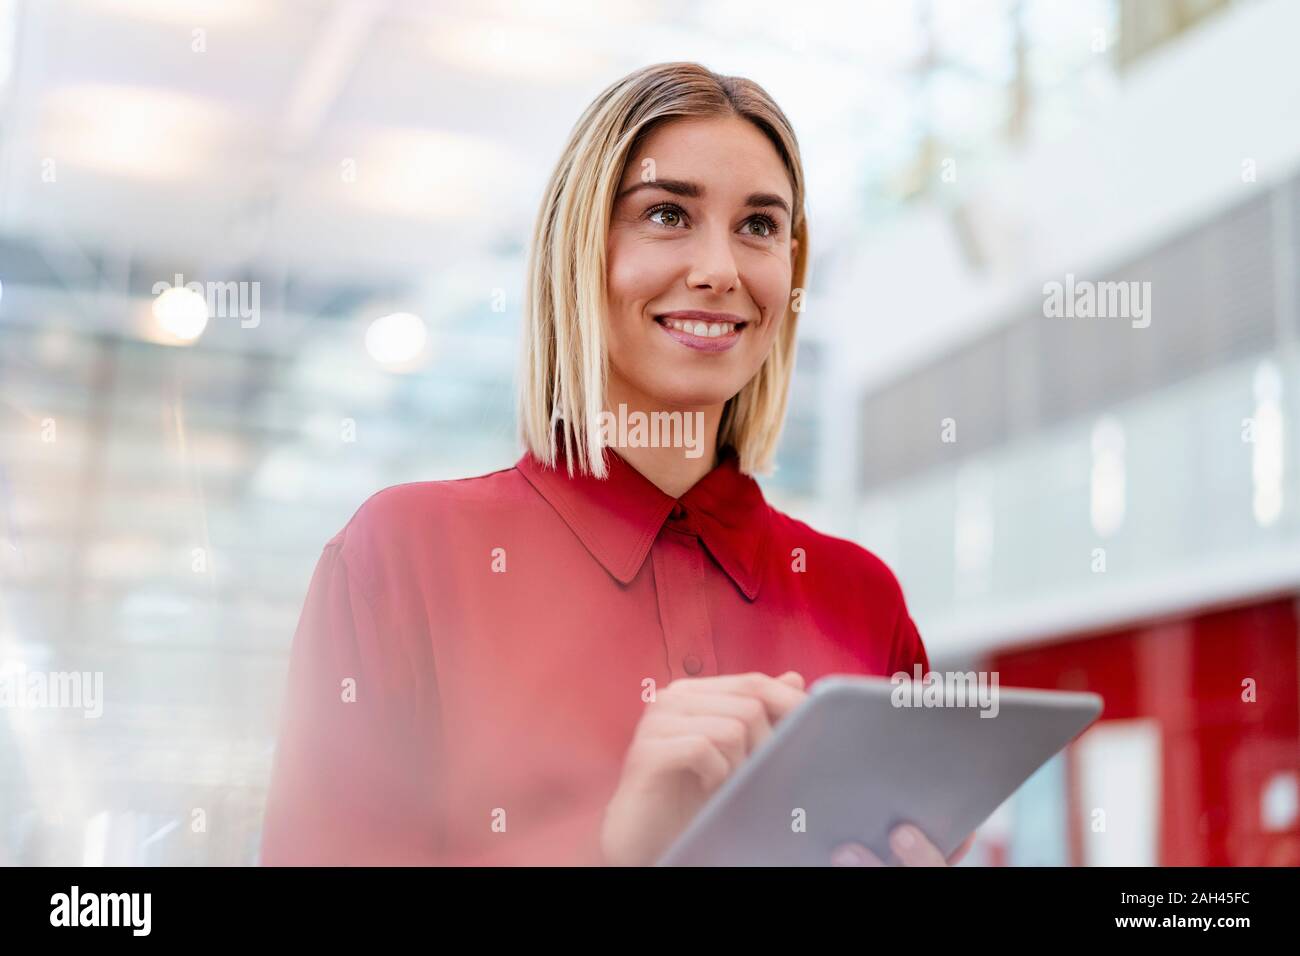 Smiling young woman wearing red shirt using tablet Banque D'Images